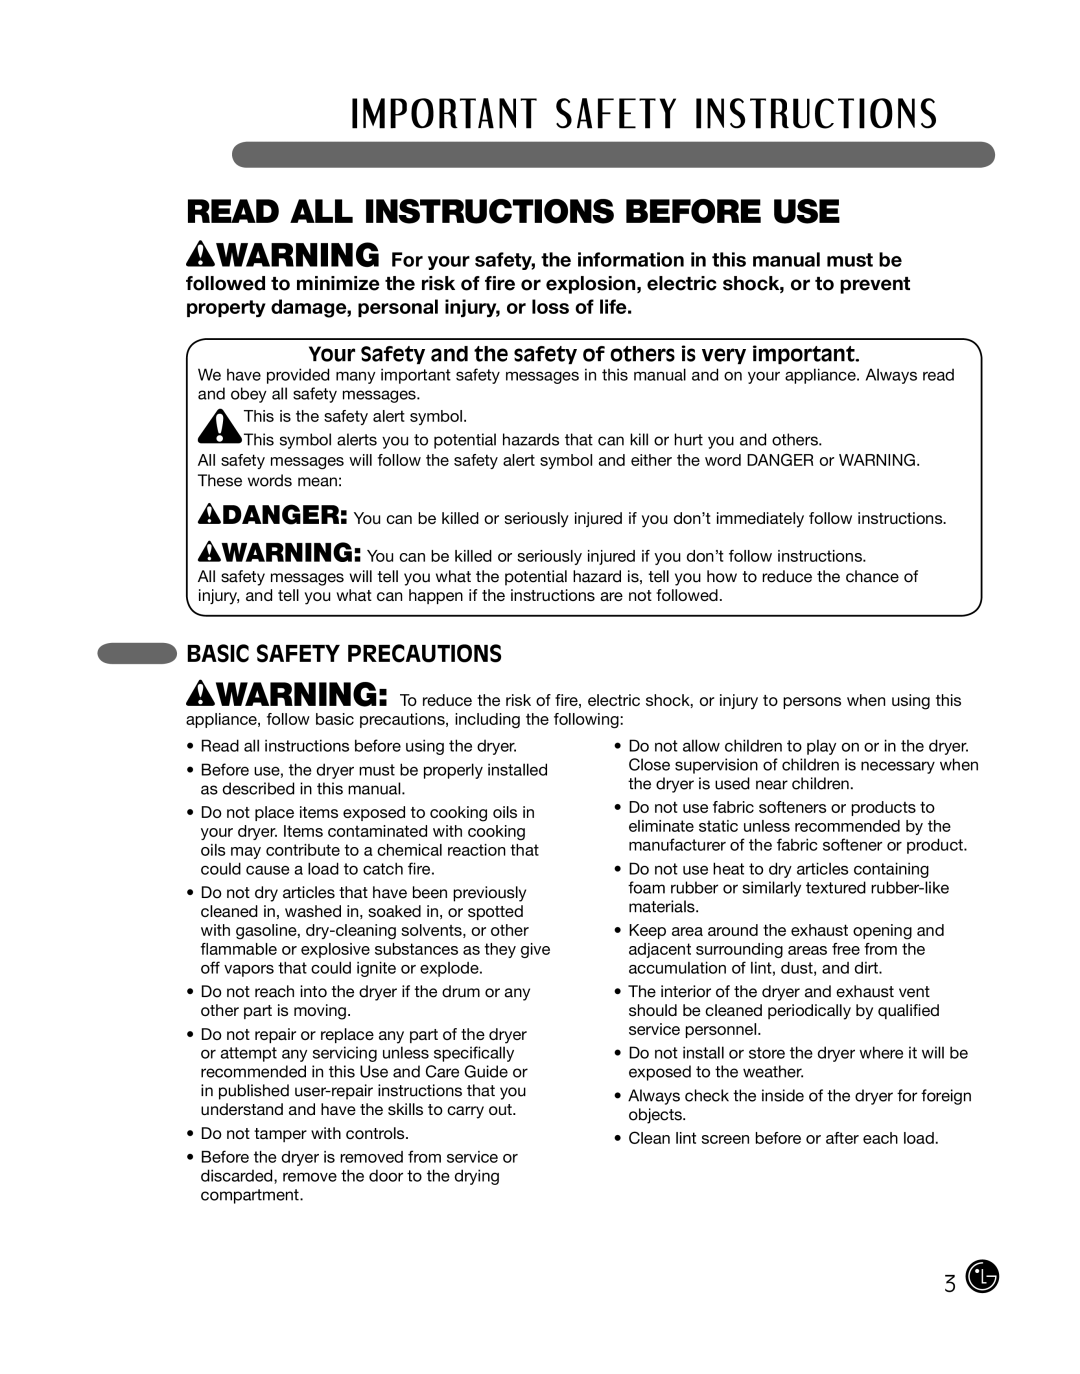 LG Electronics P154 manual Read All Instructions Before Use, Basic Safety Precautions 